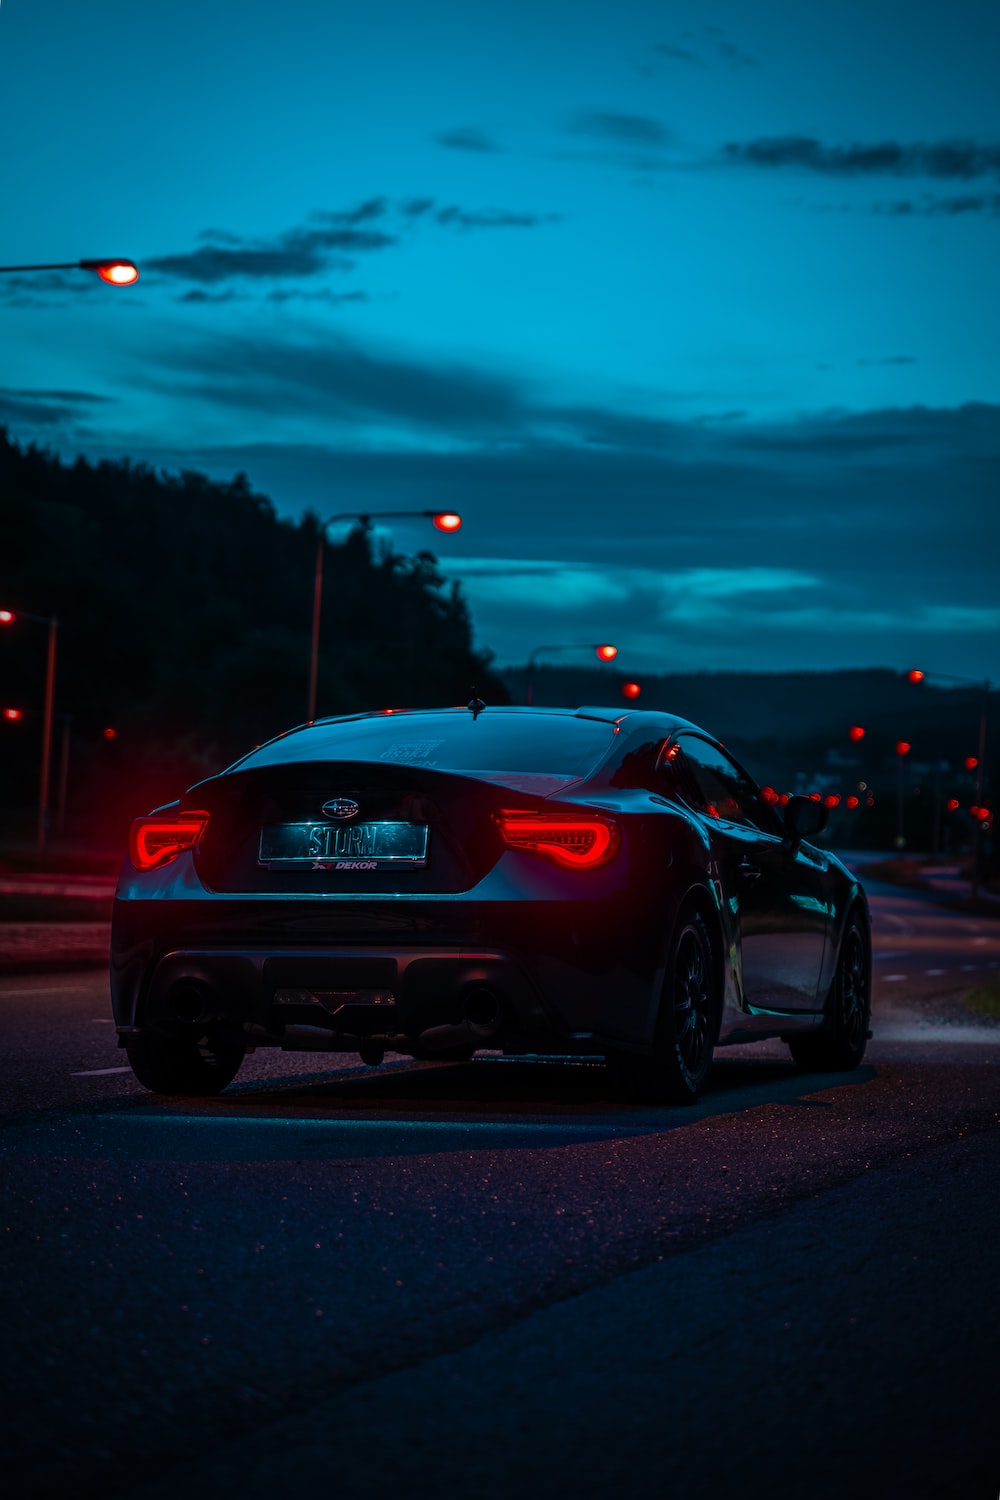 Night Car Picture. Download Free Image